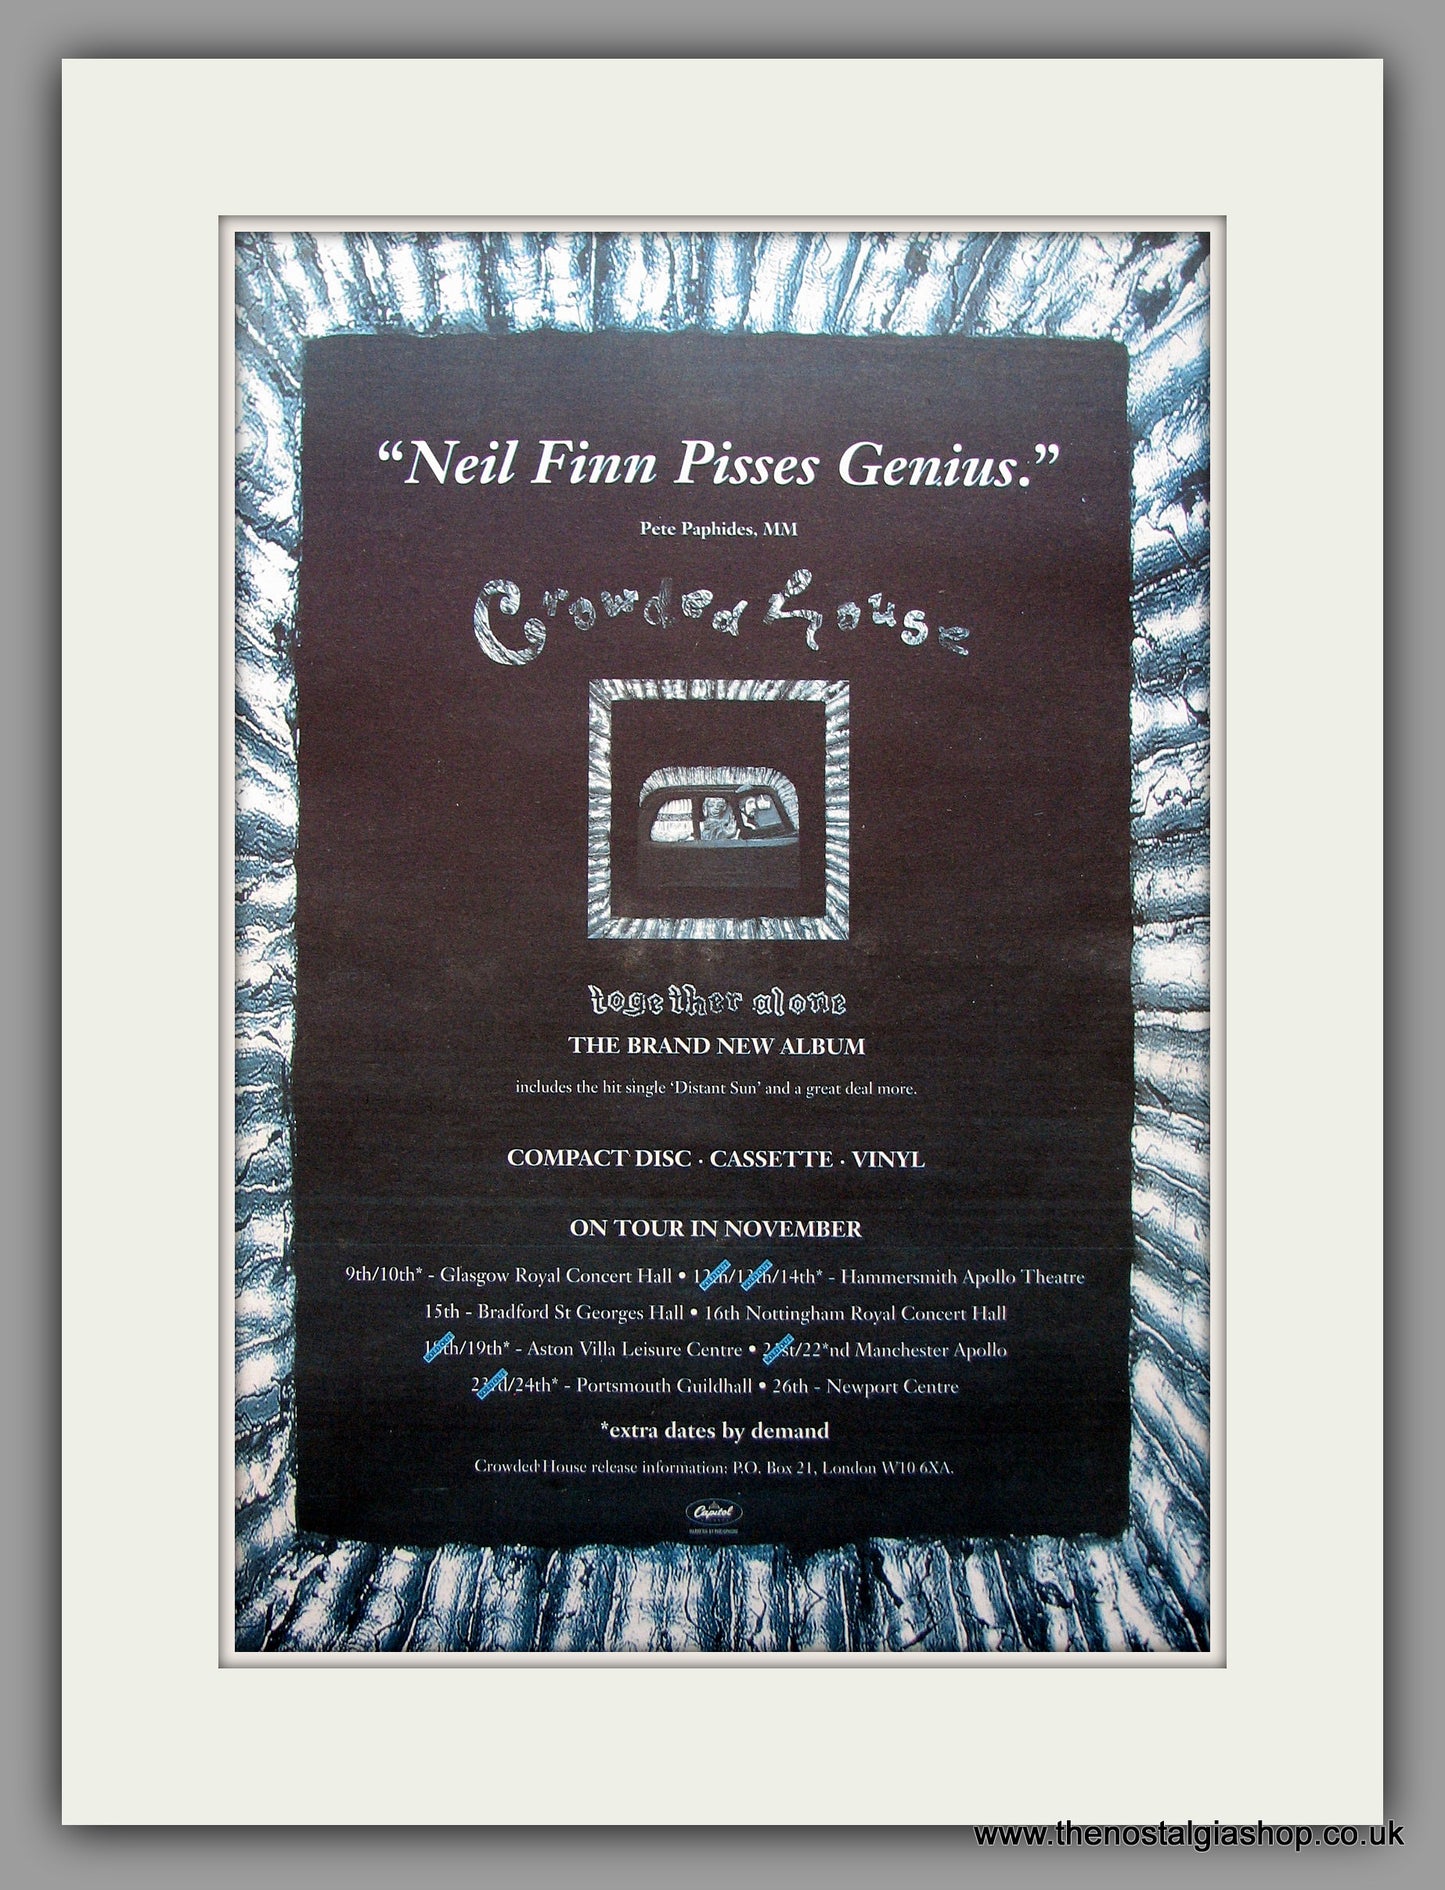 Neil Finn Pisses Genius Crowded House - Together Alone. Original Vintage Advert 1993 (ref AD10927)